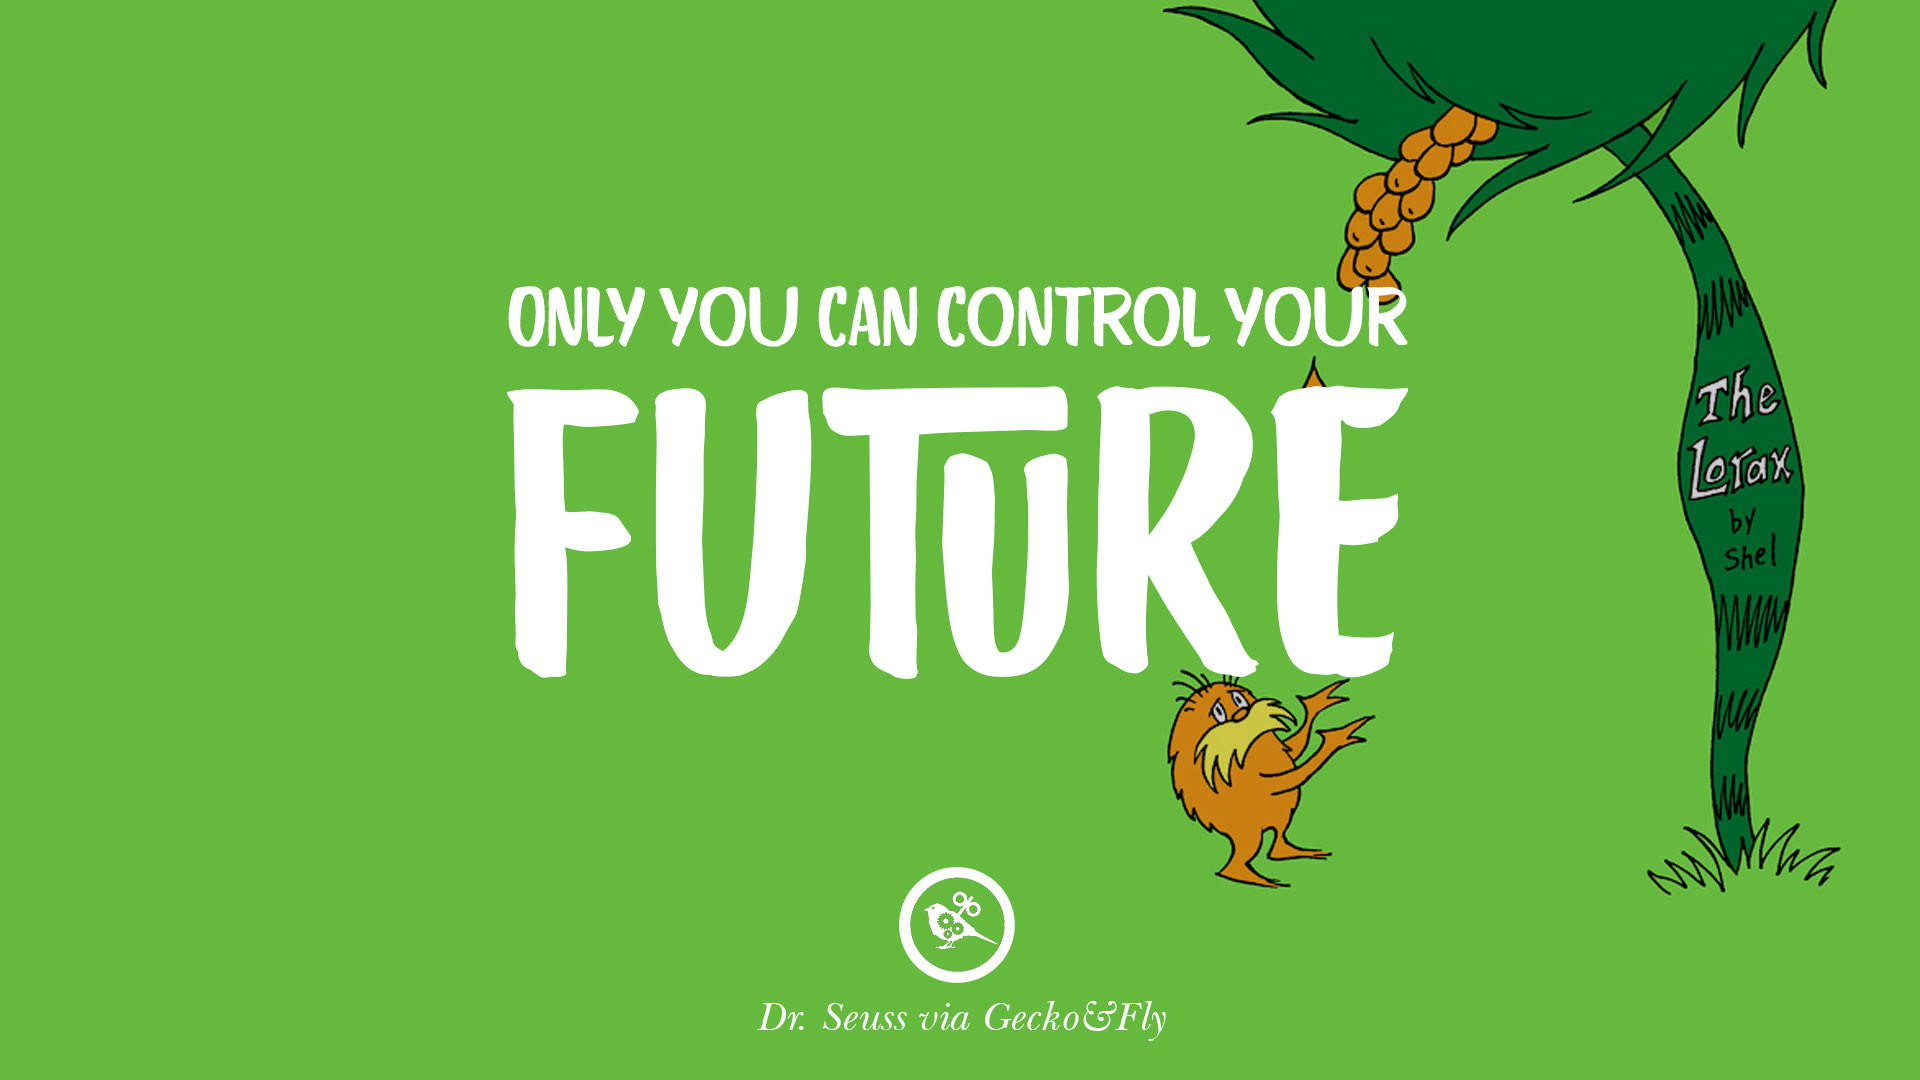 1920x1080 Only you can control your future. – Dr Seuss